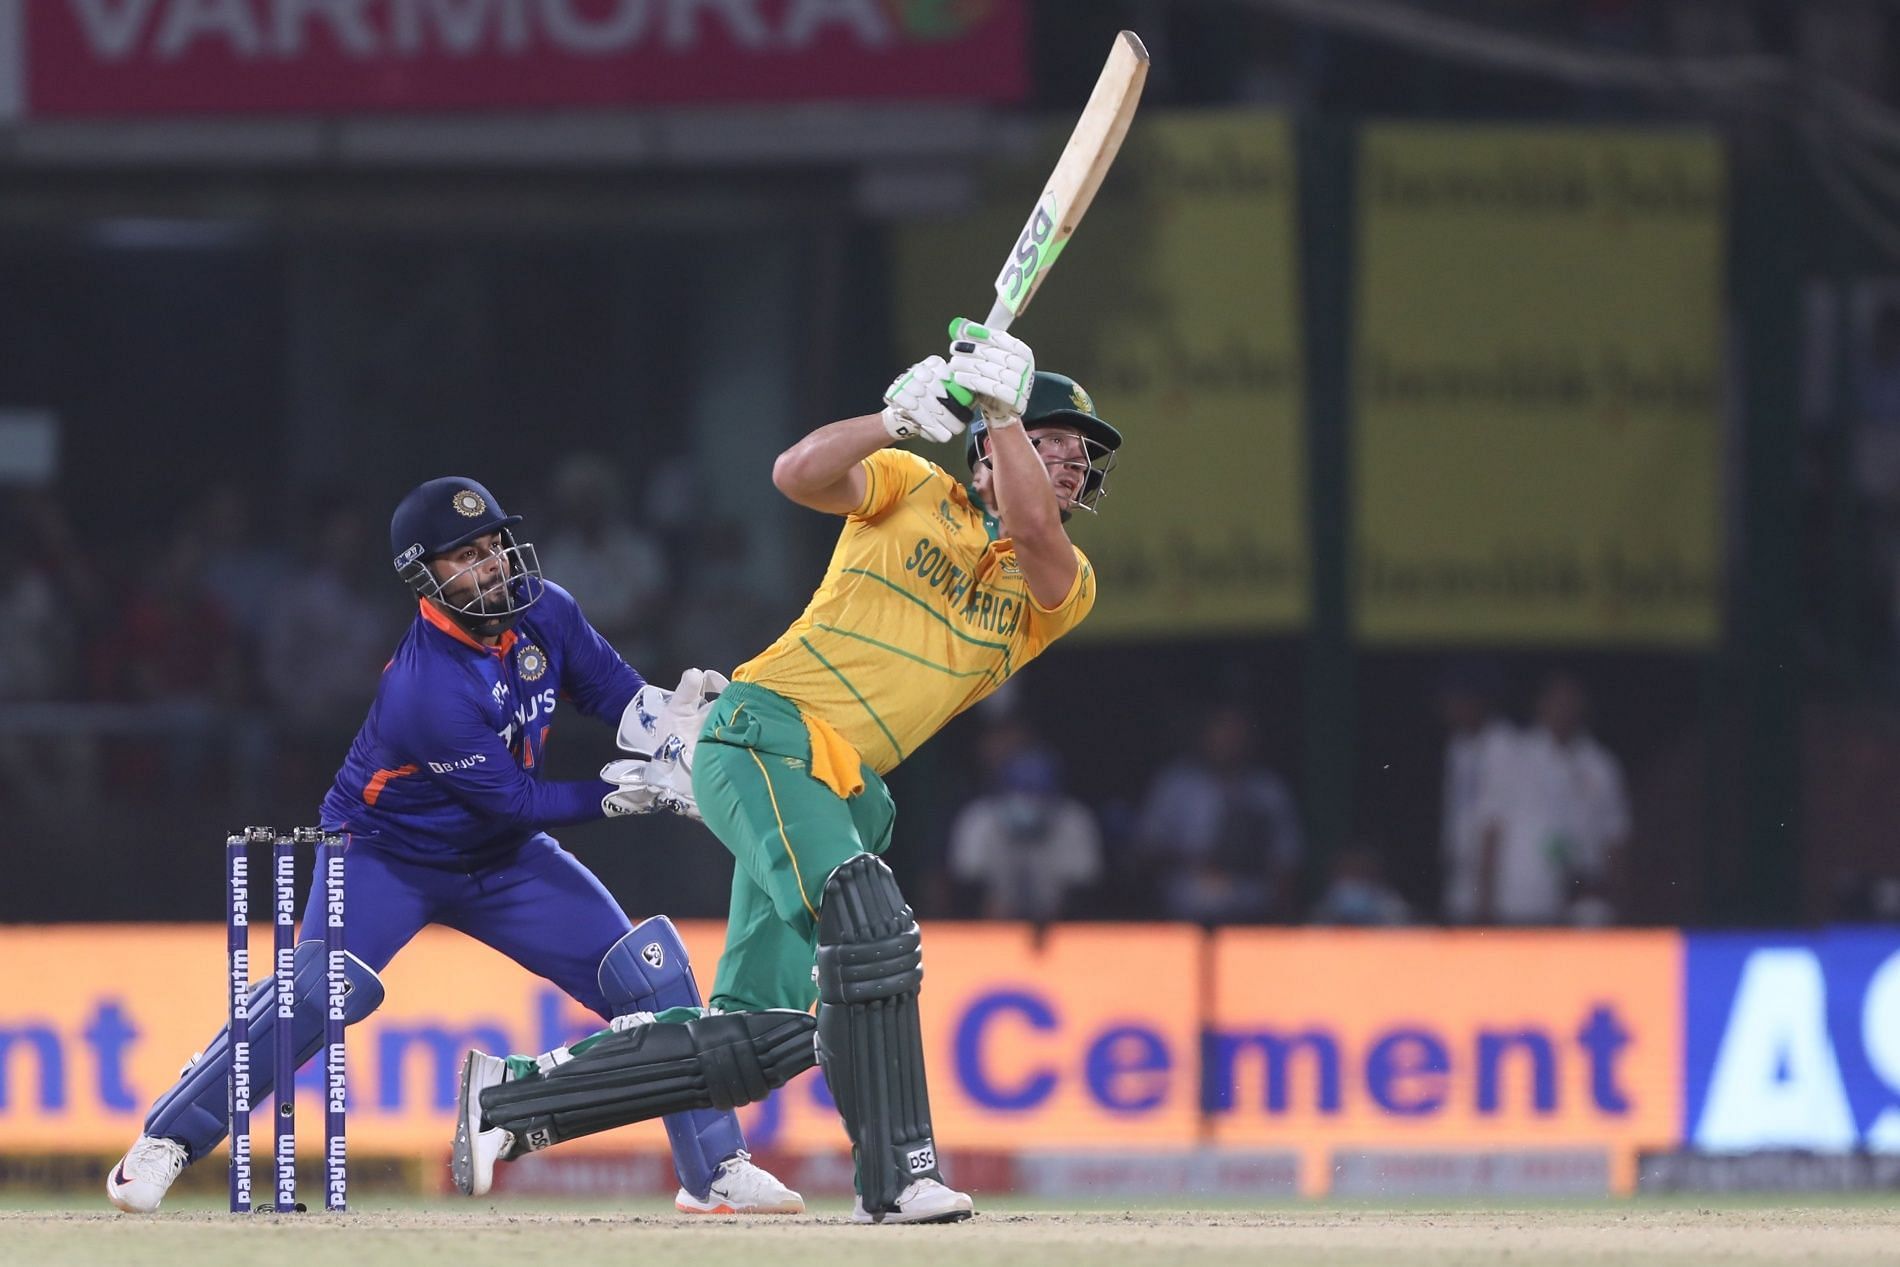 David Miller in full flow against India in the first T20I. Pic: ICC